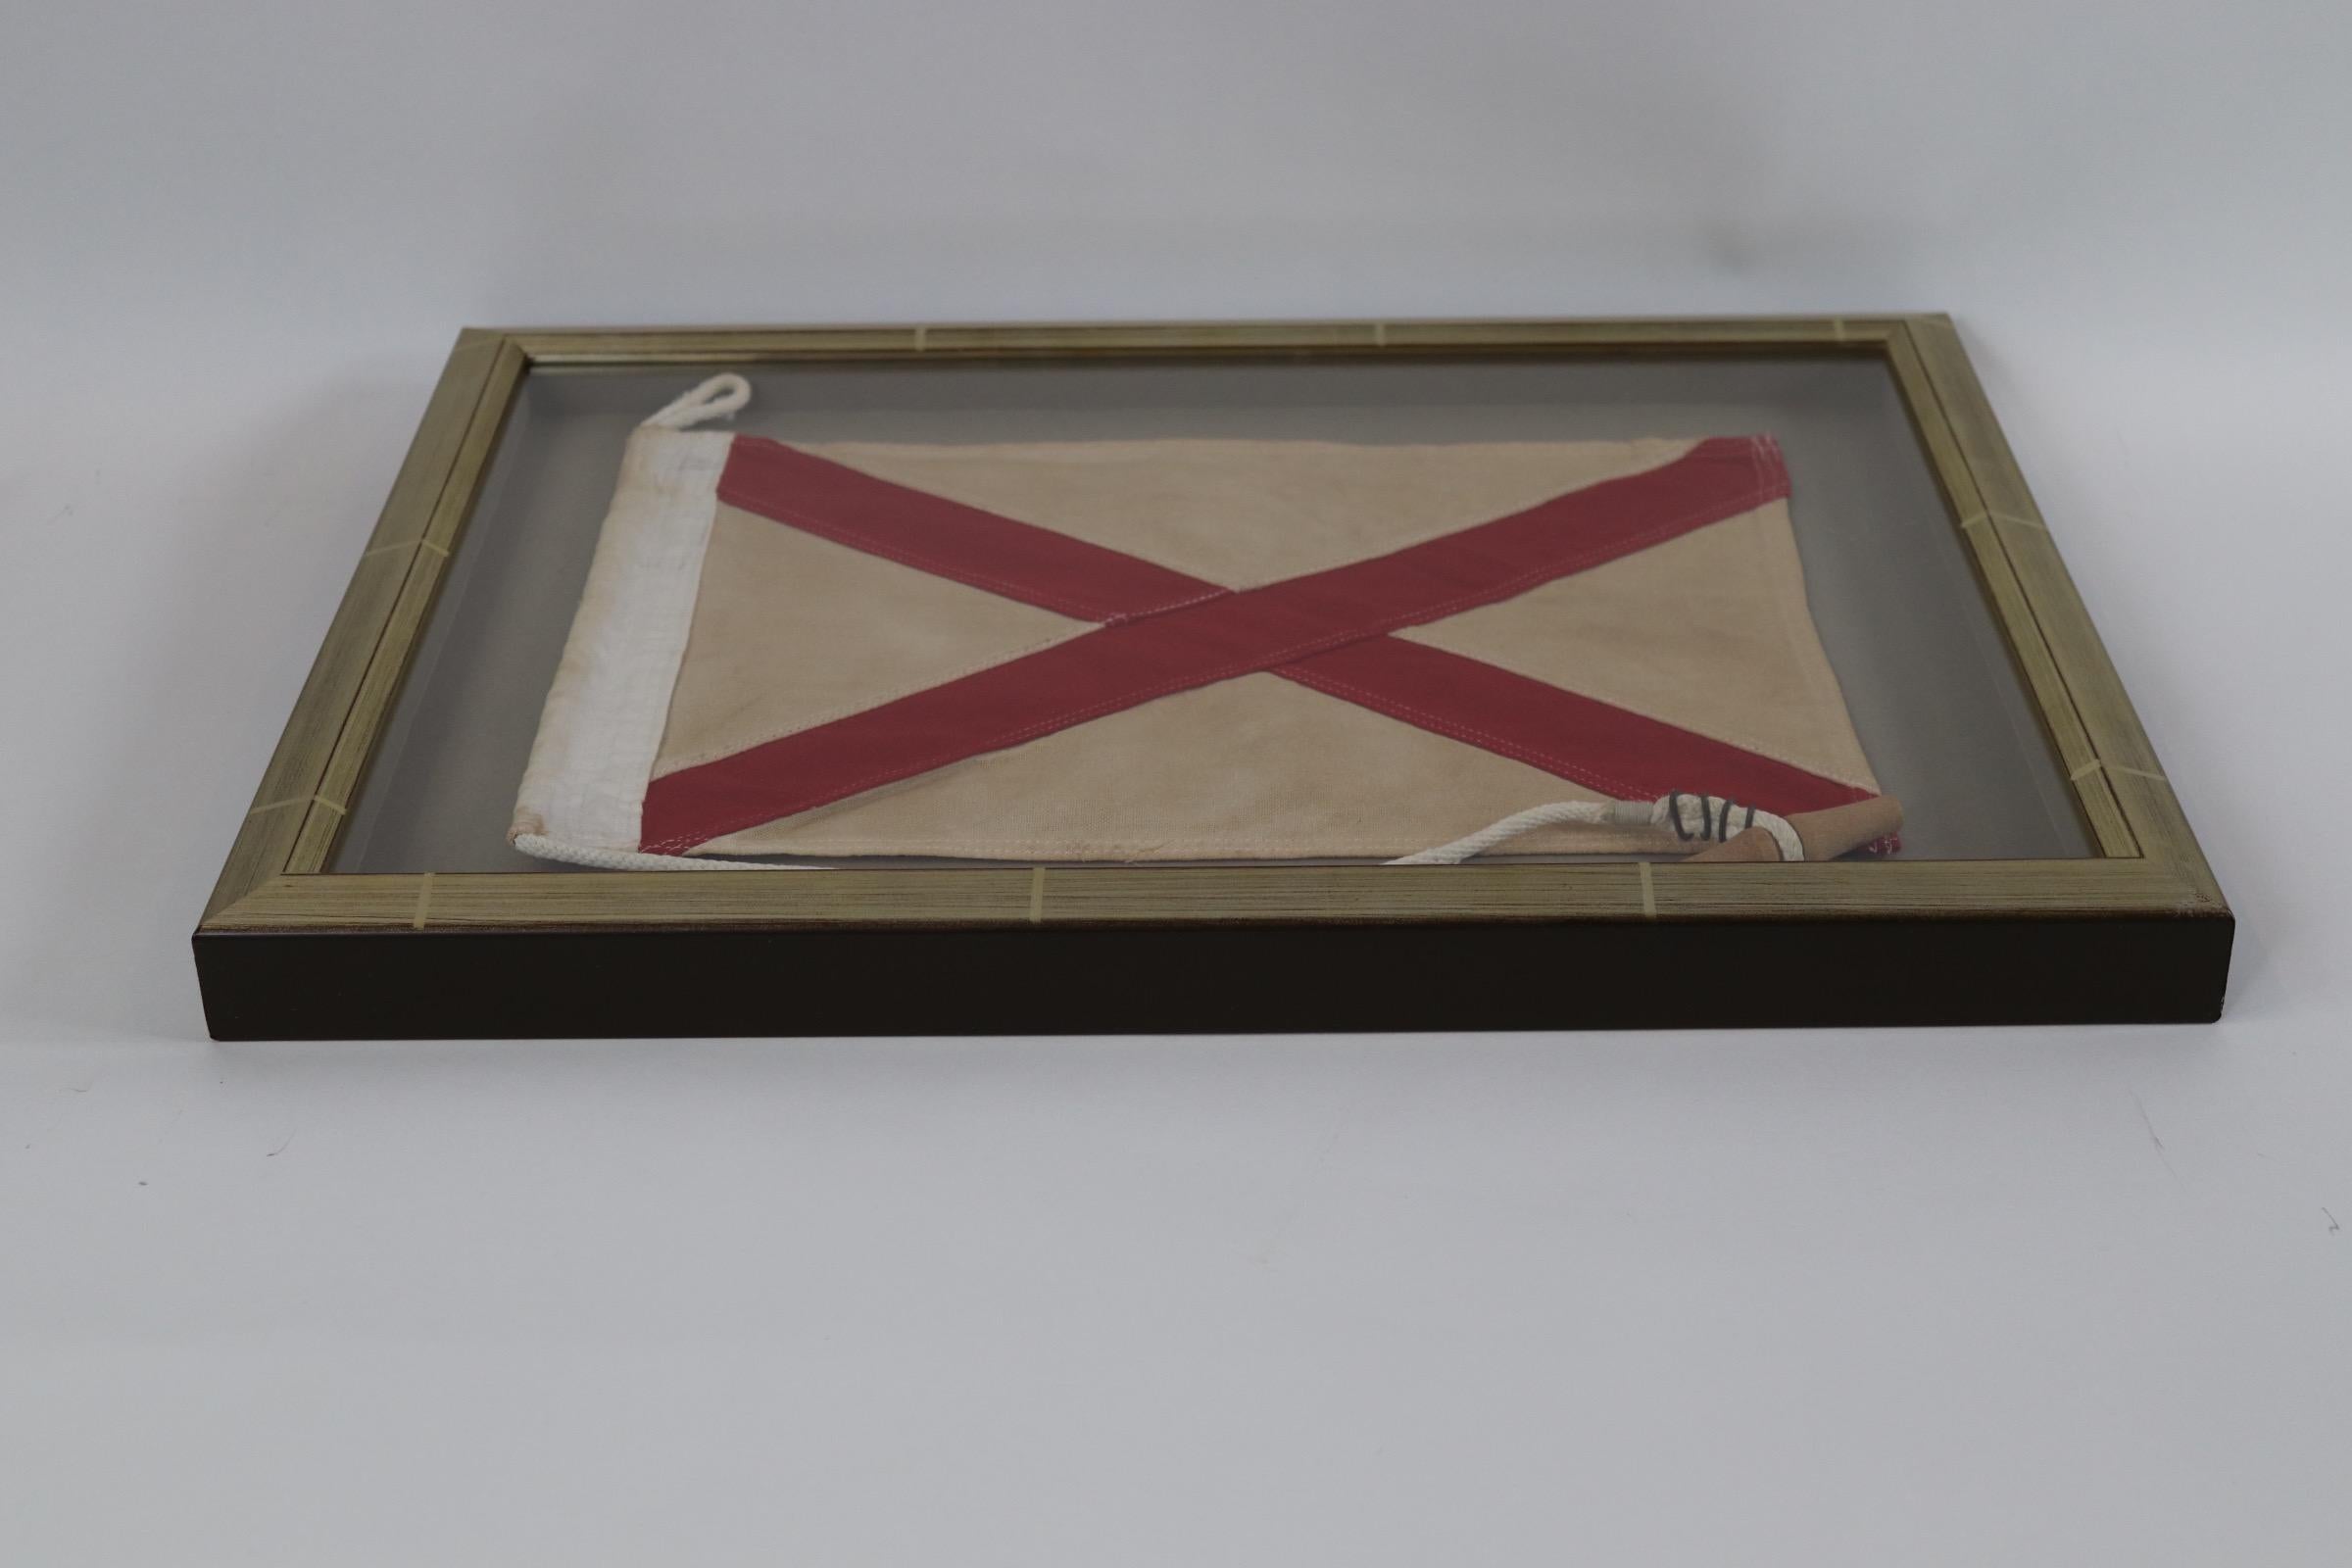 Shadow box framed ships signal flag with attached rope and wood toggle. Red diamond on a white field. Letter V. Weight is 5 pounds.